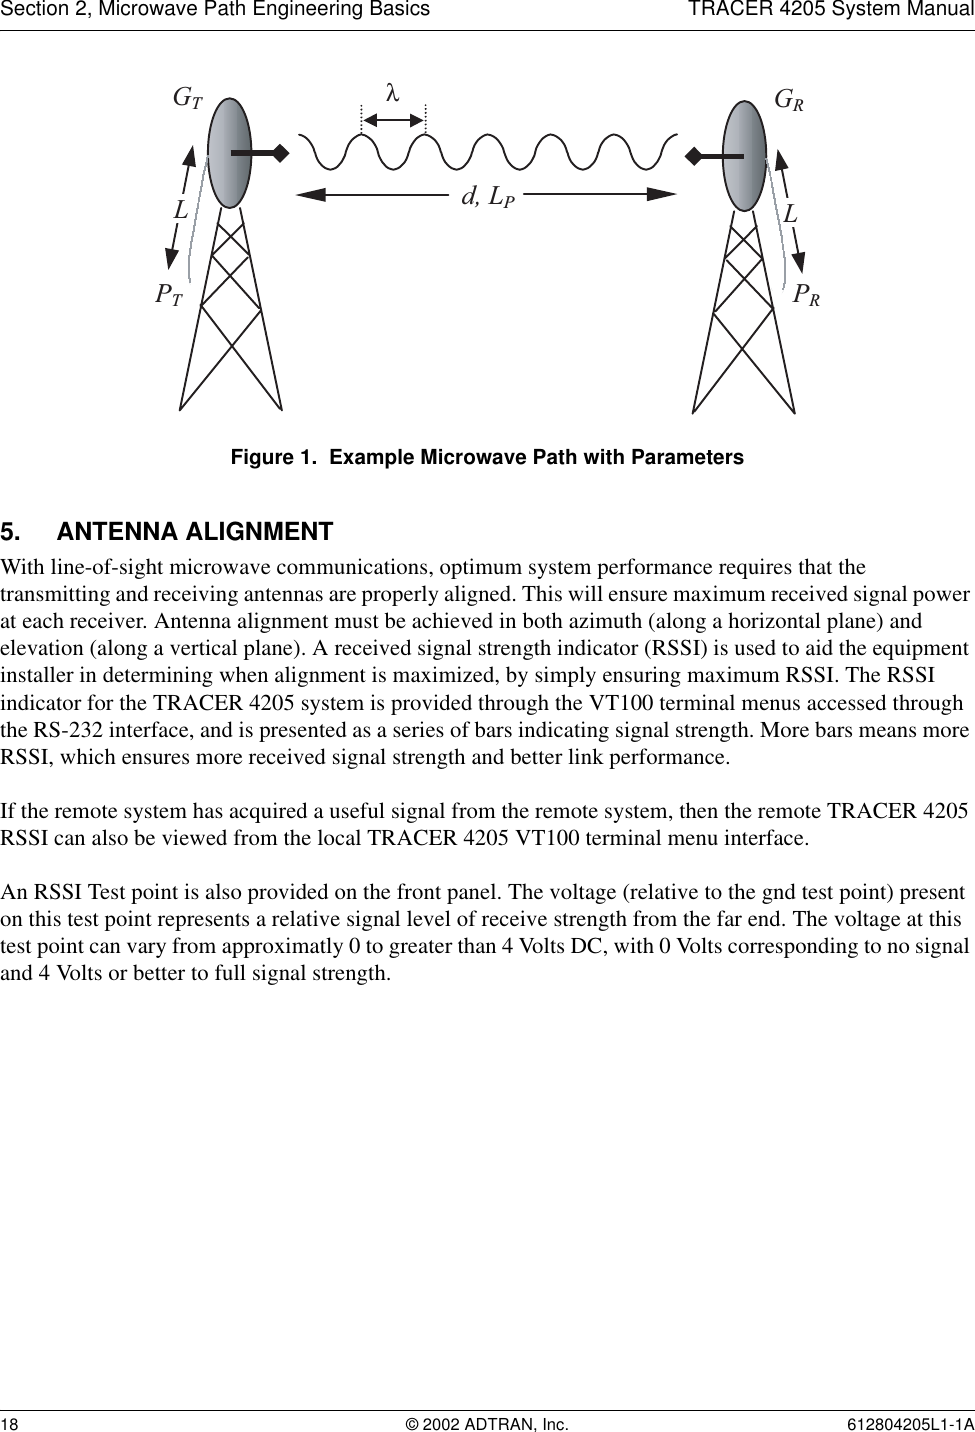 Section 2, Microwave Path Engineering Basics TRACER 4205 System Manual18 © 2002 ADTRAN, Inc. 612804205L1-1AFigure 1.  Example Microwave Path with Parameters5. ANTENNA ALIGNMENTWith line-of-sight microwave communications, optimum system performance requires that the transmitting and receiving antennas are properly aligned. This will ensure maximum received signal power at each receiver. Antenna alignment must be achieved in both azimuth (along a horizontal plane) and elevation (along a vertical plane). A received signal strength indicator (RSSI) is used to aid the equipment installer in determining when alignment is maximized, by simply ensuring maximum RSSI. The RSSI indicator for the TRACER 4205 system is provided through the VT100 terminal menus accessed through the RS-232 interface, and is presented as a series of bars indicating signal strength. More bars means more RSSI, which ensures more received signal strength and better link performance.If the remote system has acquired a useful signal from the remote system, then the remote TRACER 4205 RSSI can also be viewed from the local TRACER 4205 VT100 terminal menu interface.An RSSI Test point is also provided on the front panel. The voltage (relative to the gnd test point) present on this test point represents a relative signal level of receive strength from the far end. The voltage at this test point can vary from approximatly 0 to greater than 4 Volts DC, with 0 Volts corresponding to no signal and 4 Volts or better to full signal strength. GTGRd, LPPTPRλLL